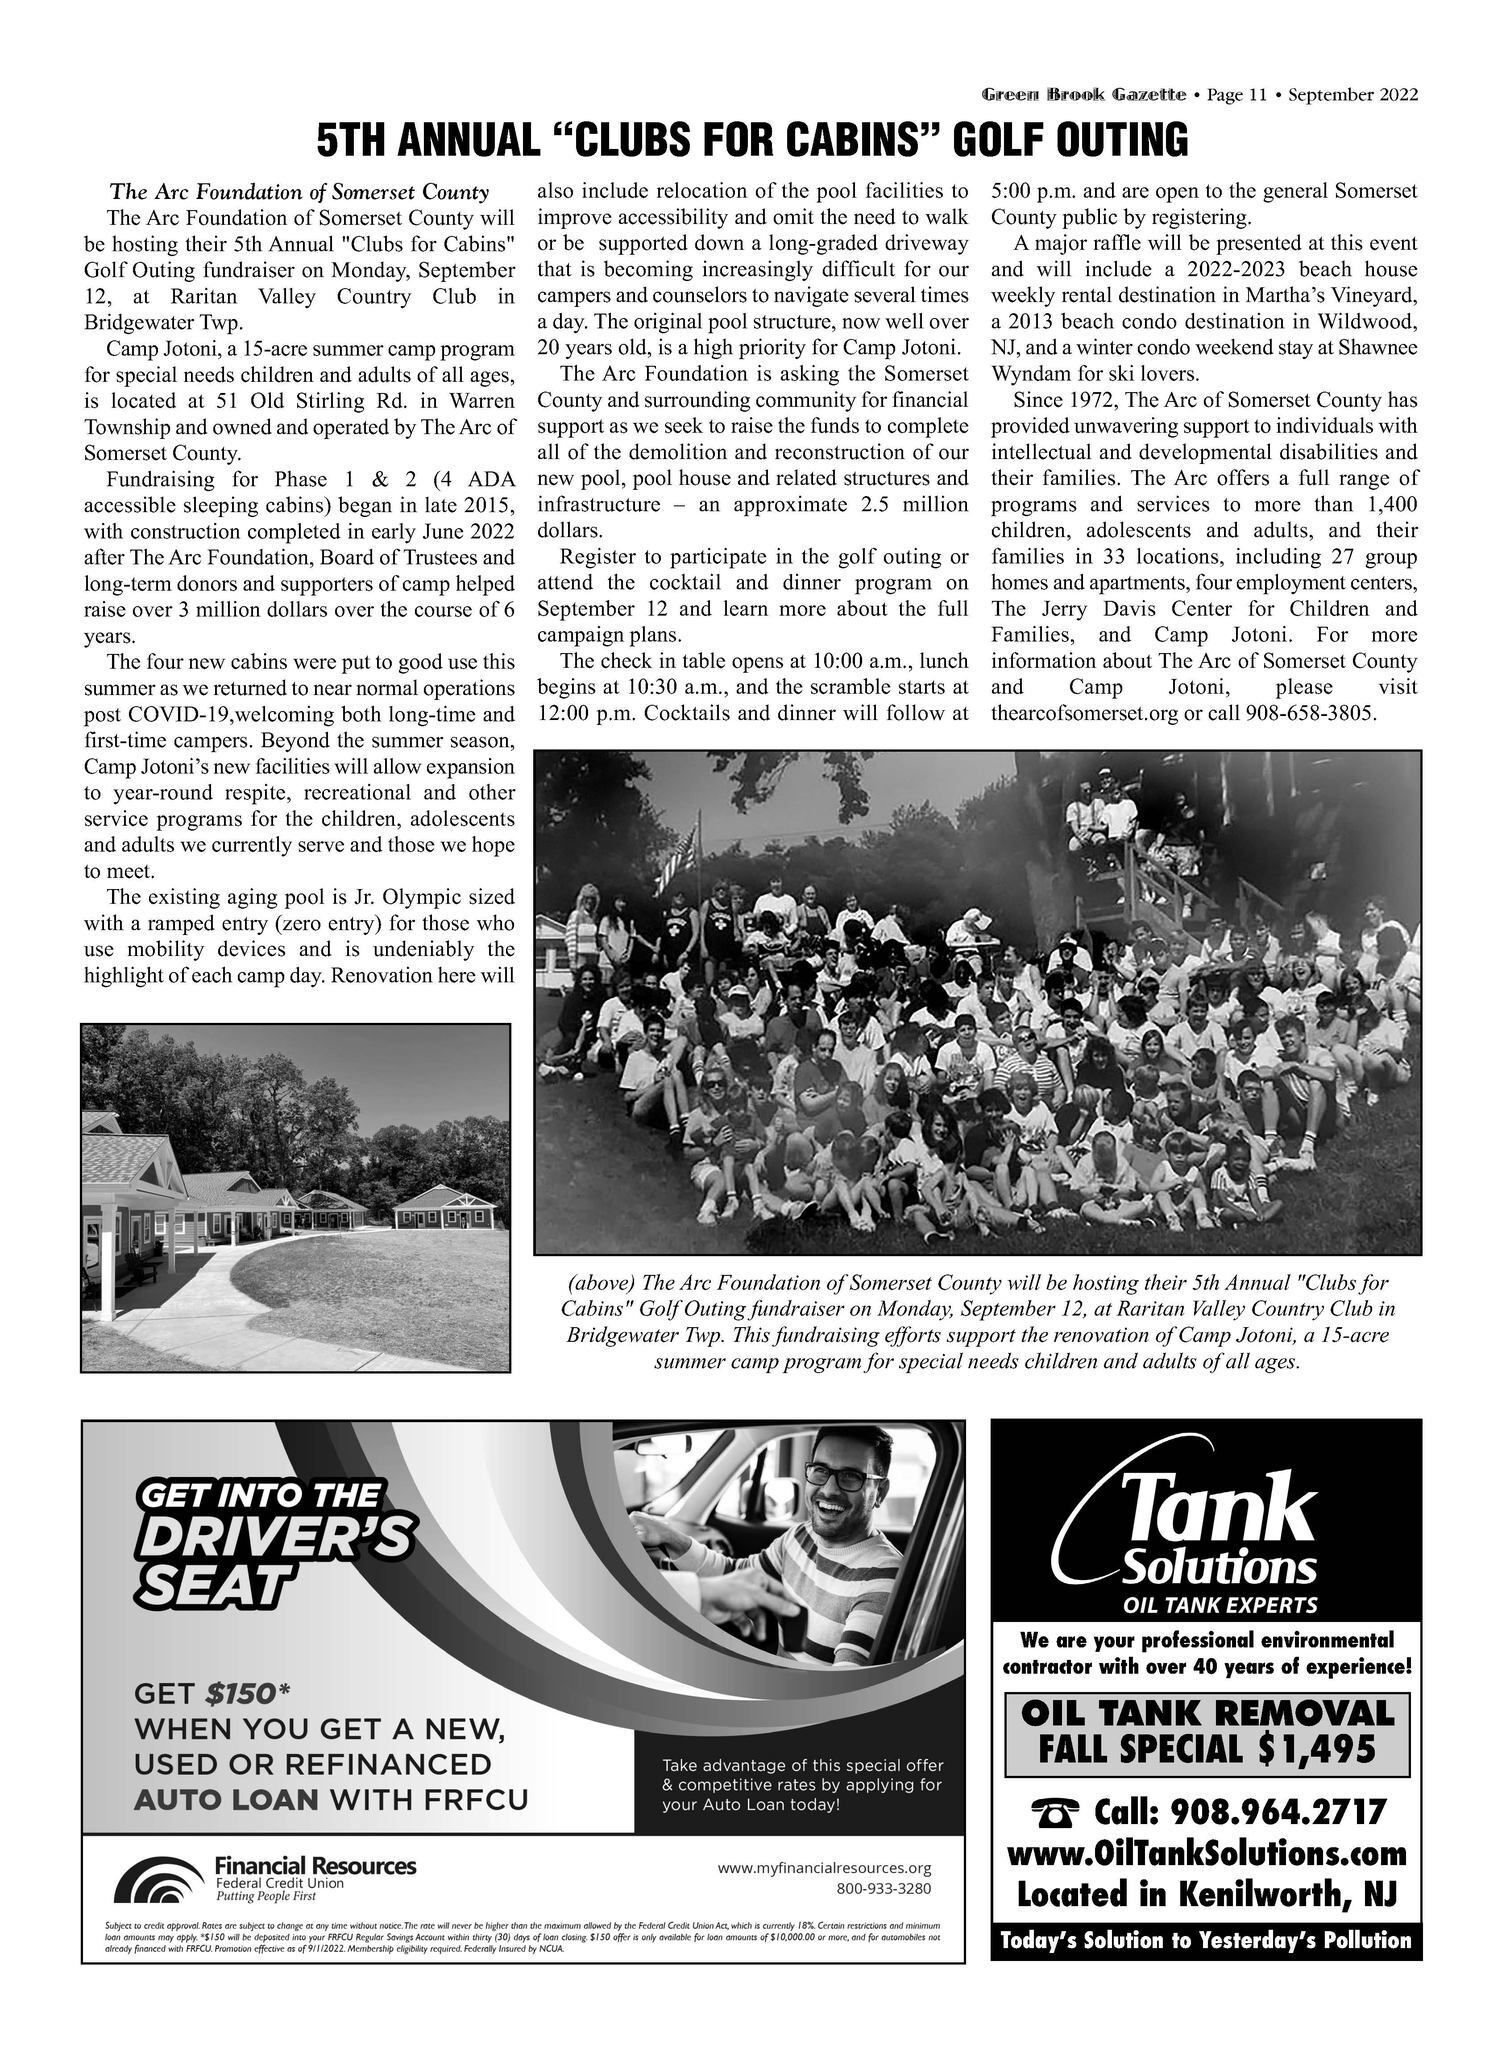 Clubs for Cabins Featured in The Green Brook Gazette